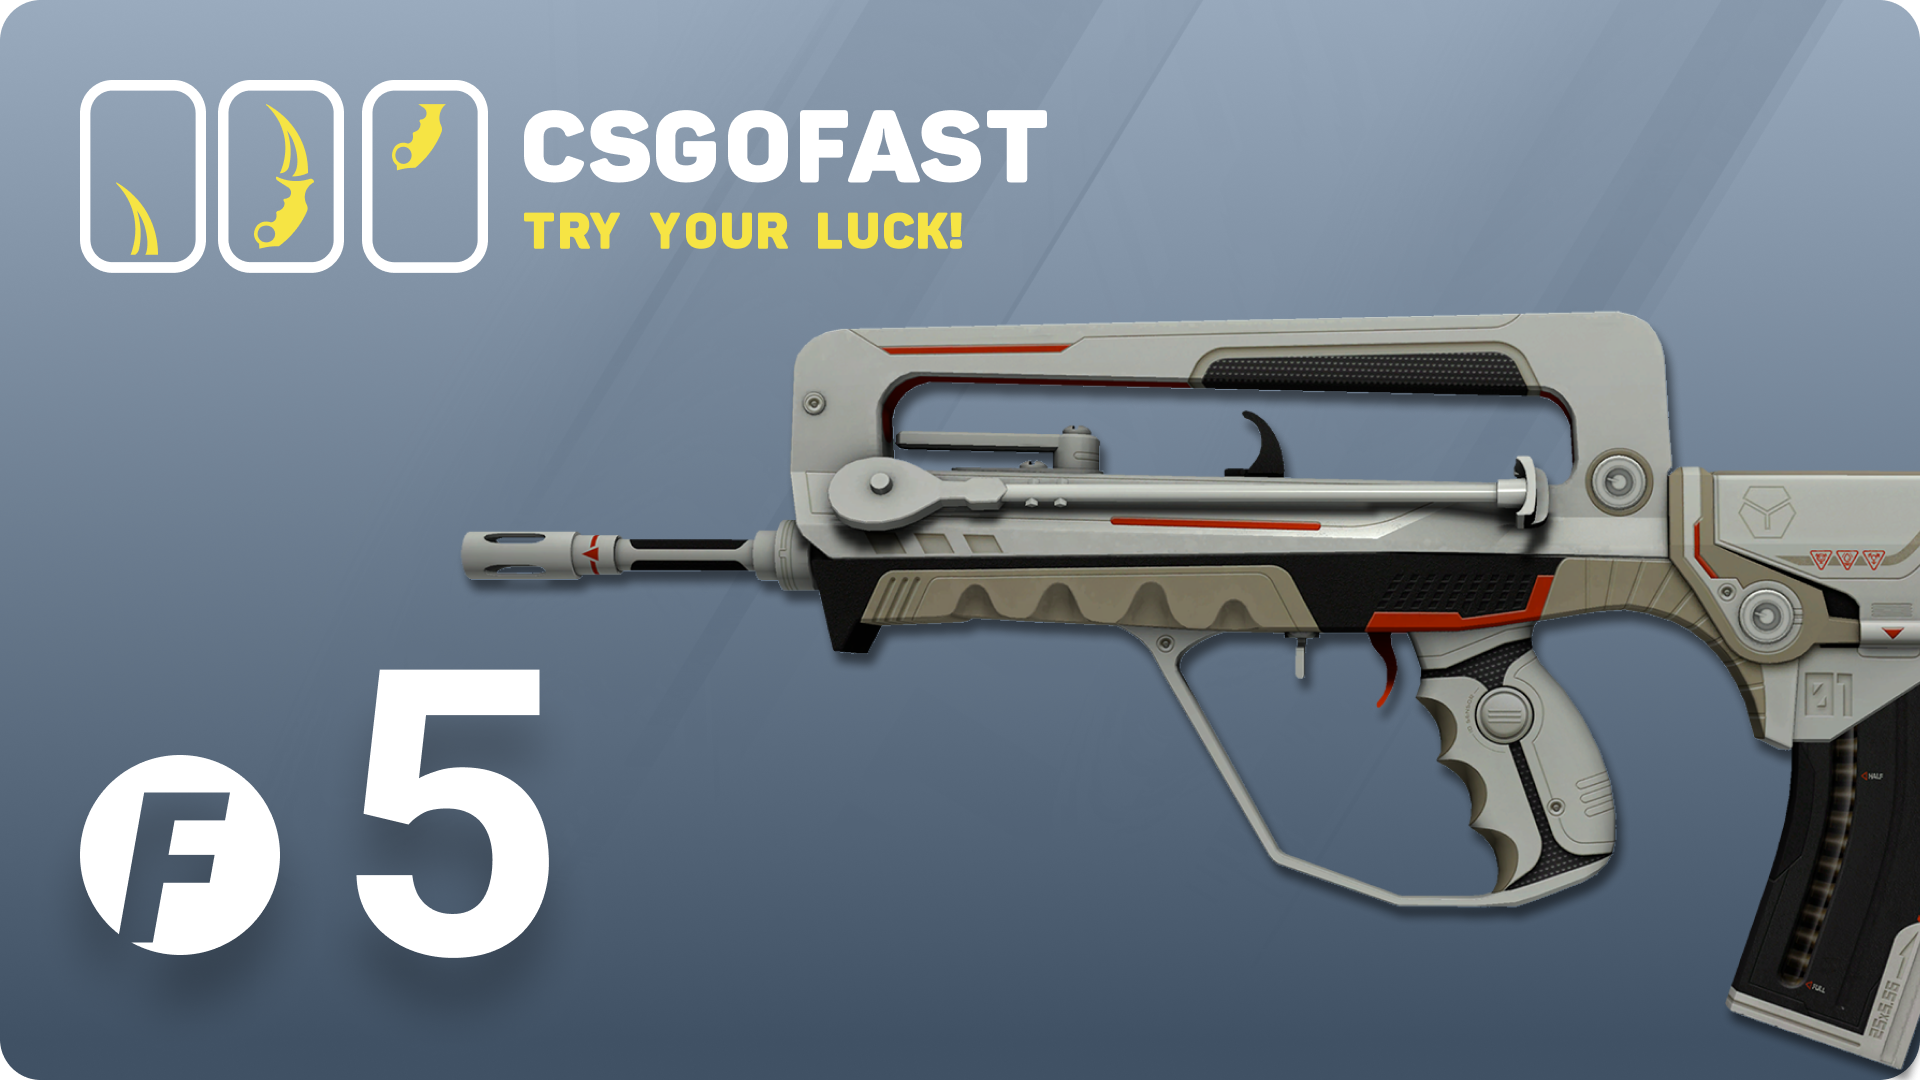 (3.63$) CSGOFAST 5 Fast Coins Gift Card